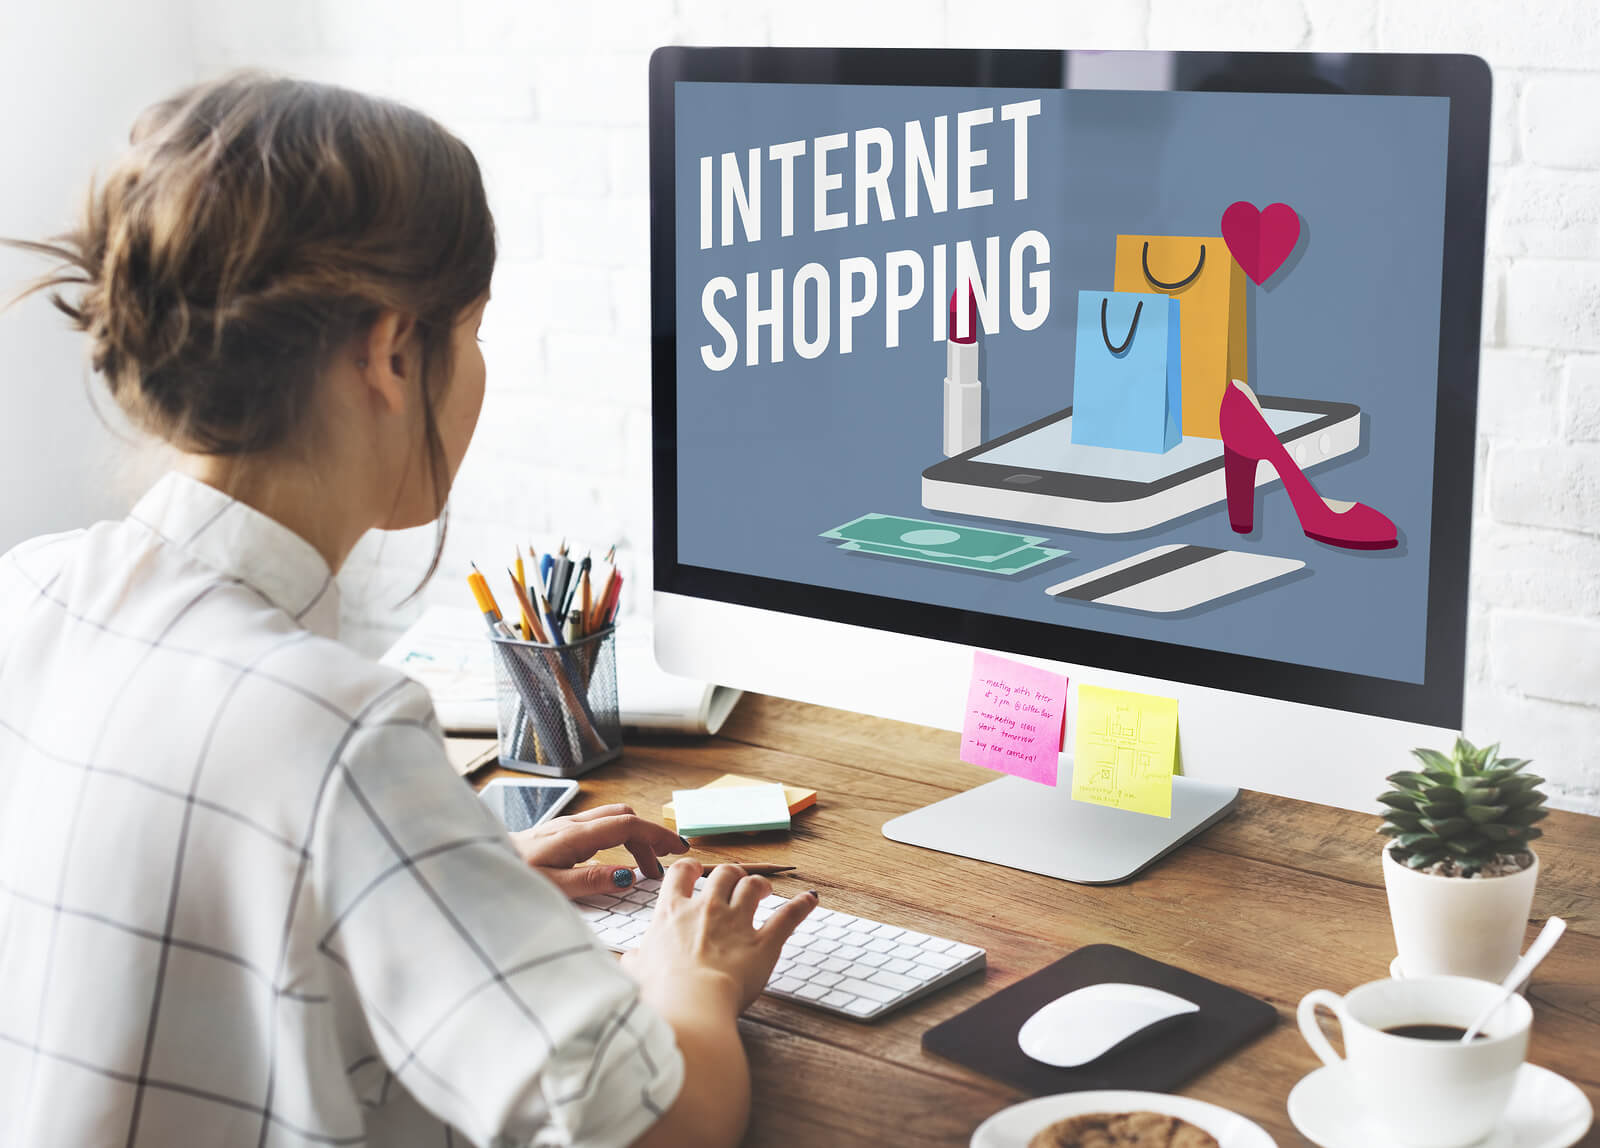 3 Easy Ways to Improve Online Shopping Experience for Customers